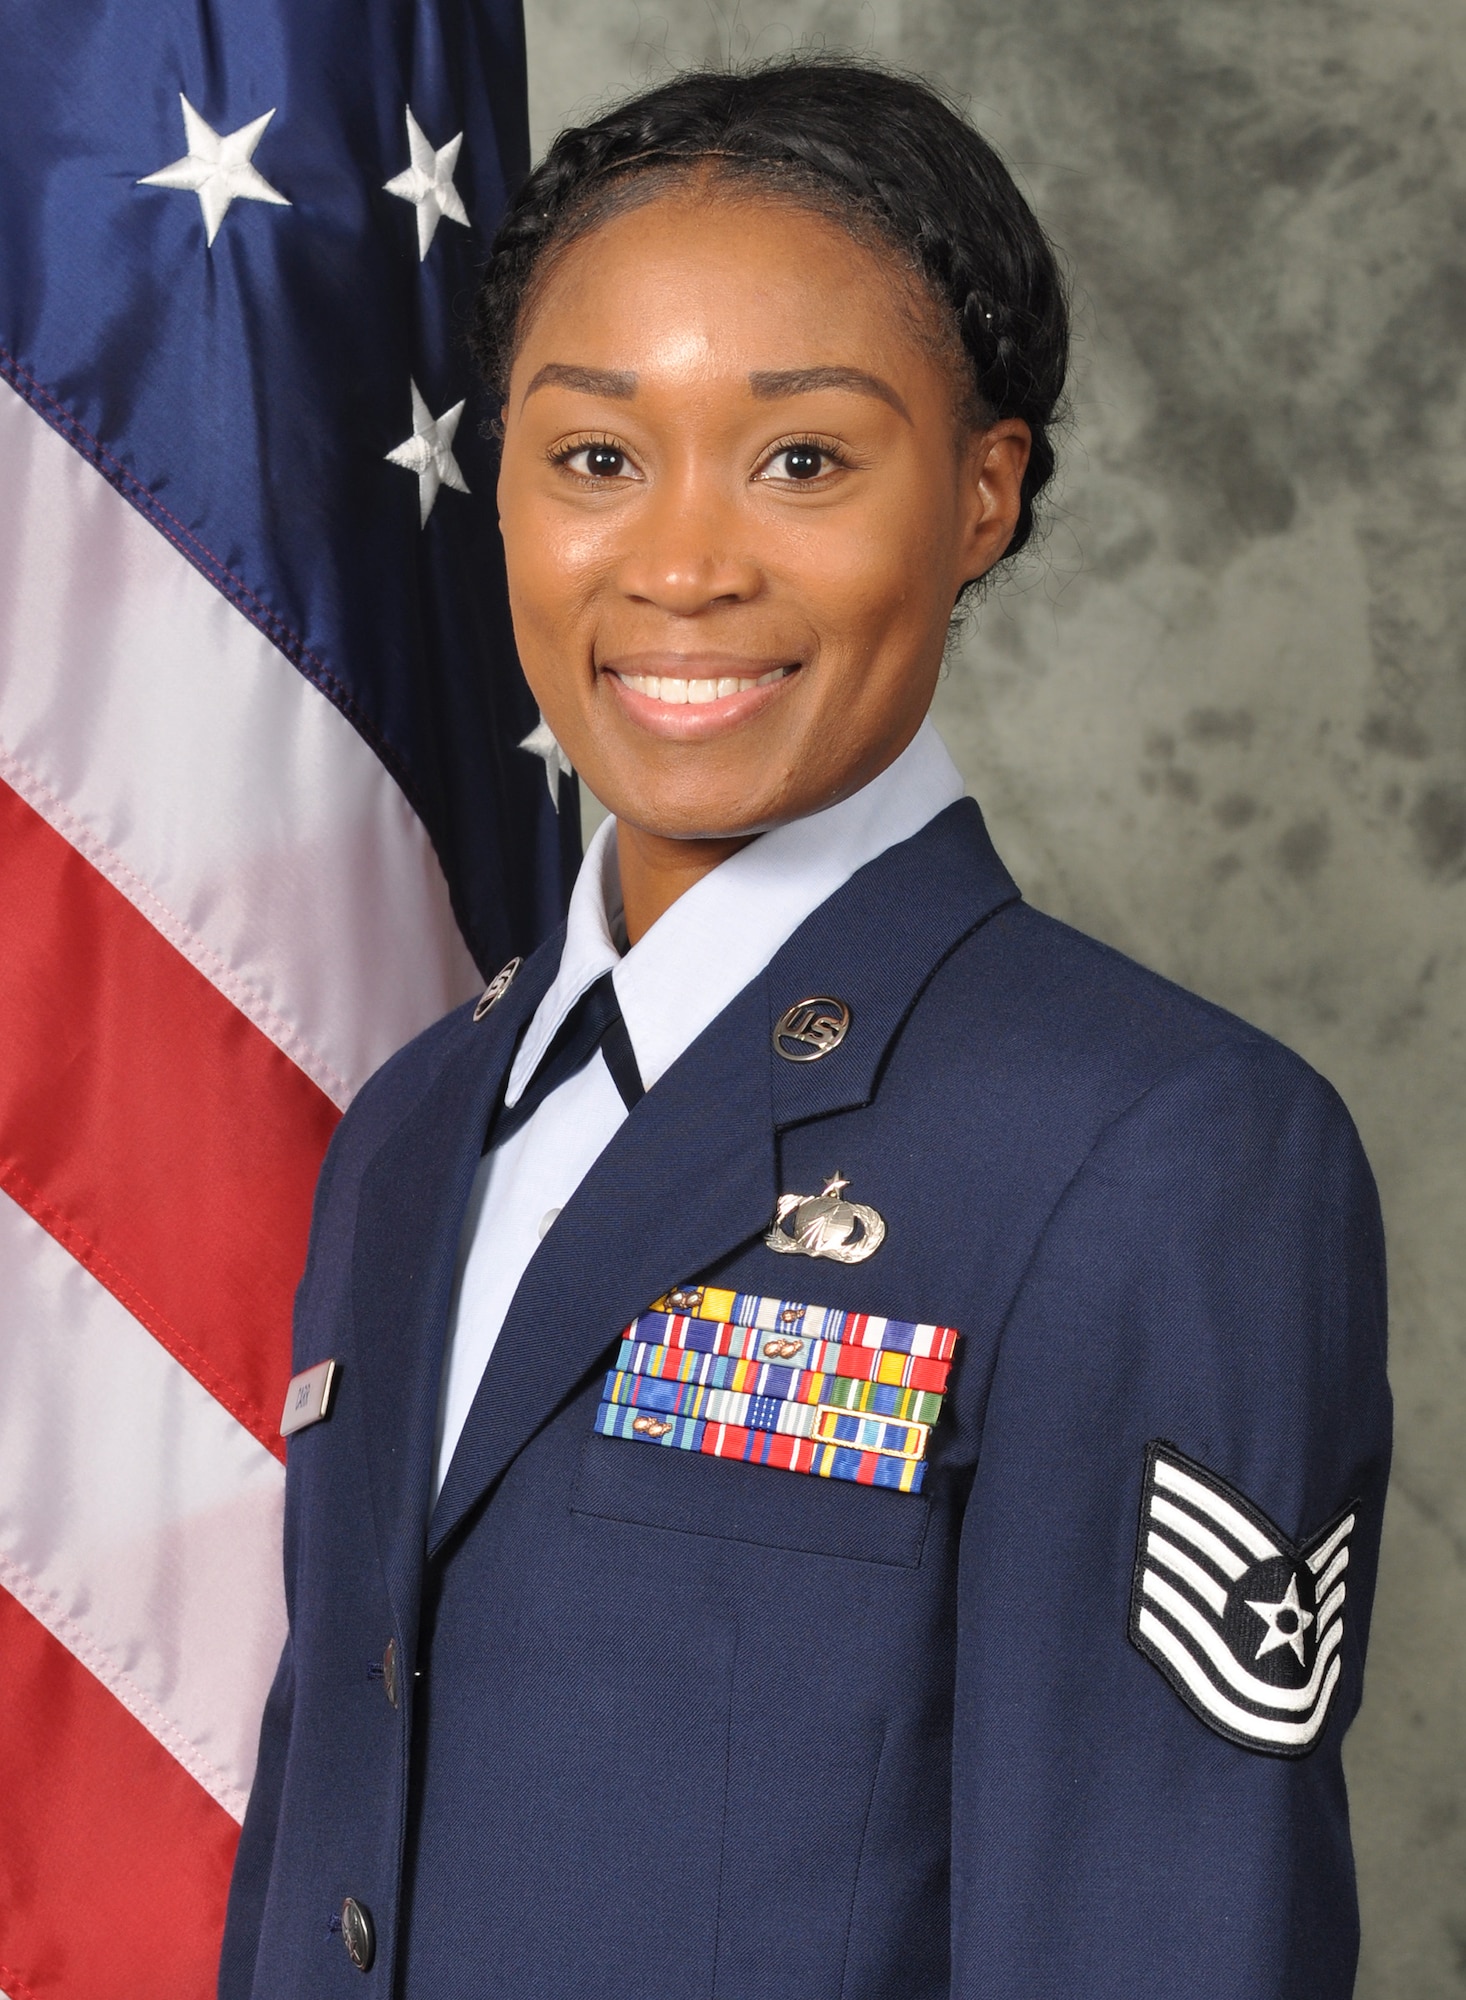 Tech. Sgt. Crystal Carr is the lead for military pay in the 72nd Comptroller Squadron. Originally from Florence, South Carolina, Carr has served in the U.S. Air Force for 12 years. Tinker is her fifth assignment, which includes one deployed to Al Udeid, Quatar, in 2014.